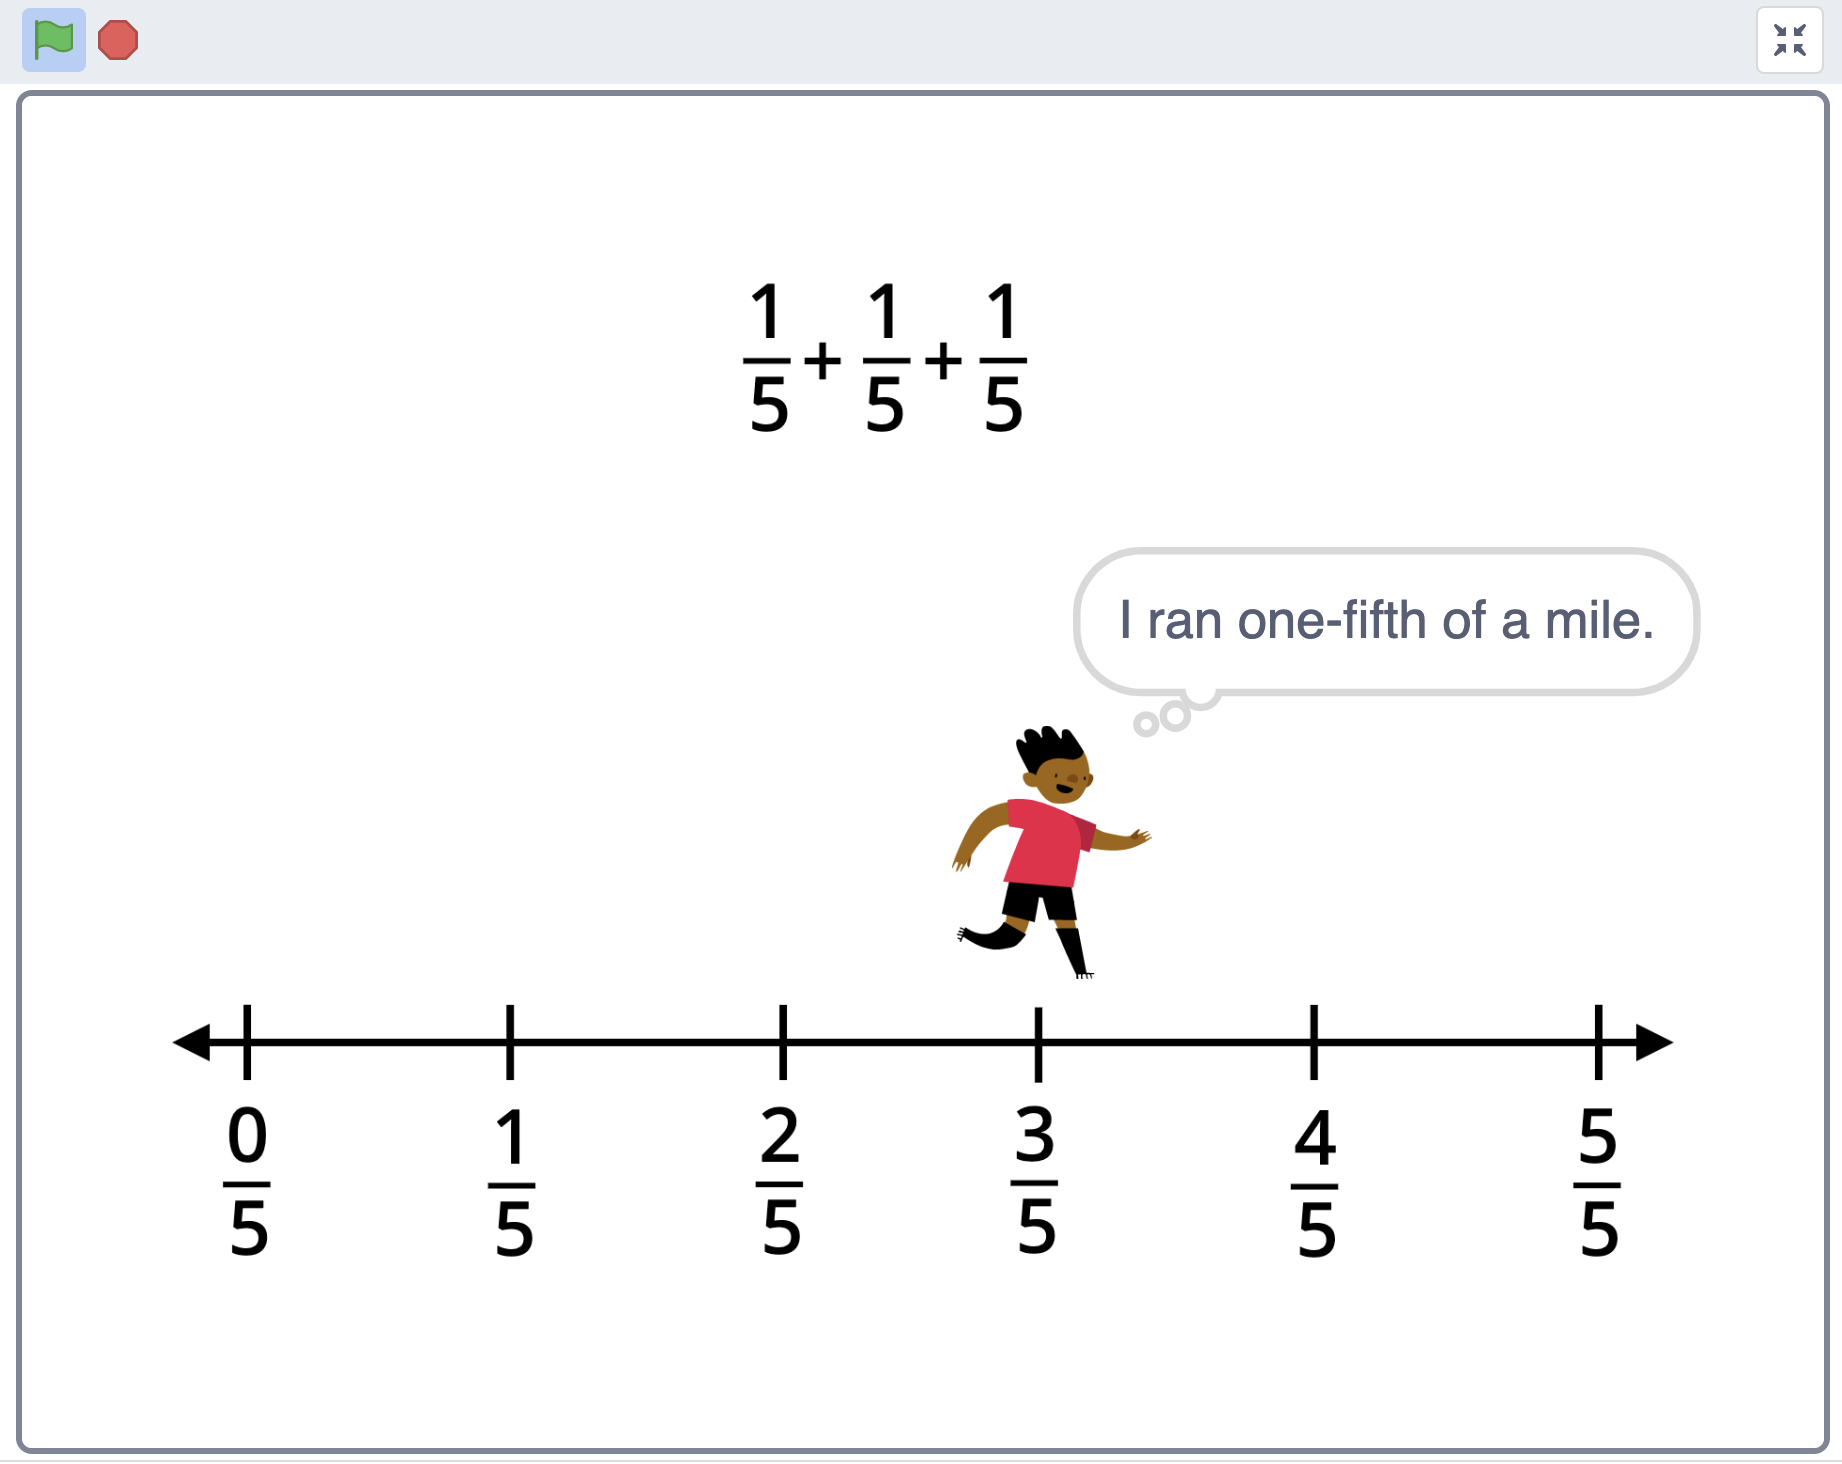 Scratch project stage depicting a boy running over a numberline split into five segments spanning zero fifths to five fifths. The boy is over three-fifths, thinking "I ran one-fifth of a mile."